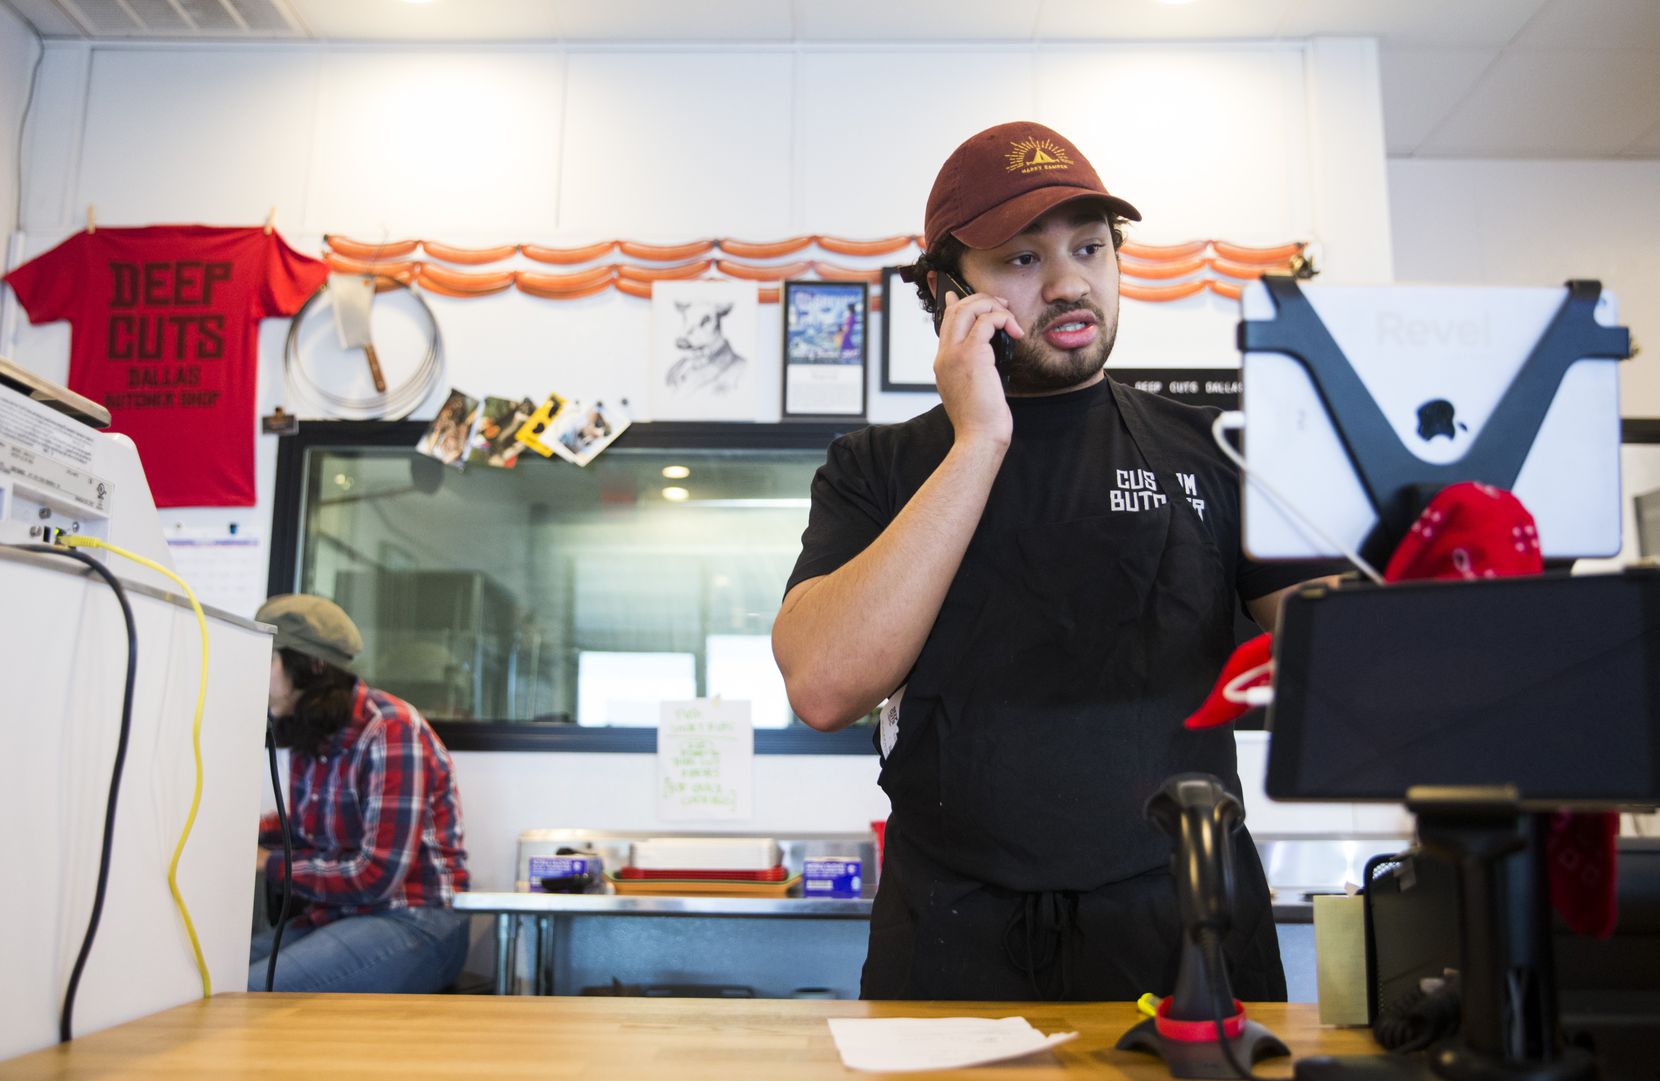 Isaiah Chavoya (right), of butcher shop Deep Cuts Dallas, takes a phone order on Sunday, March 22, 2020. Staffers ask for patience; the phone line is often busy.